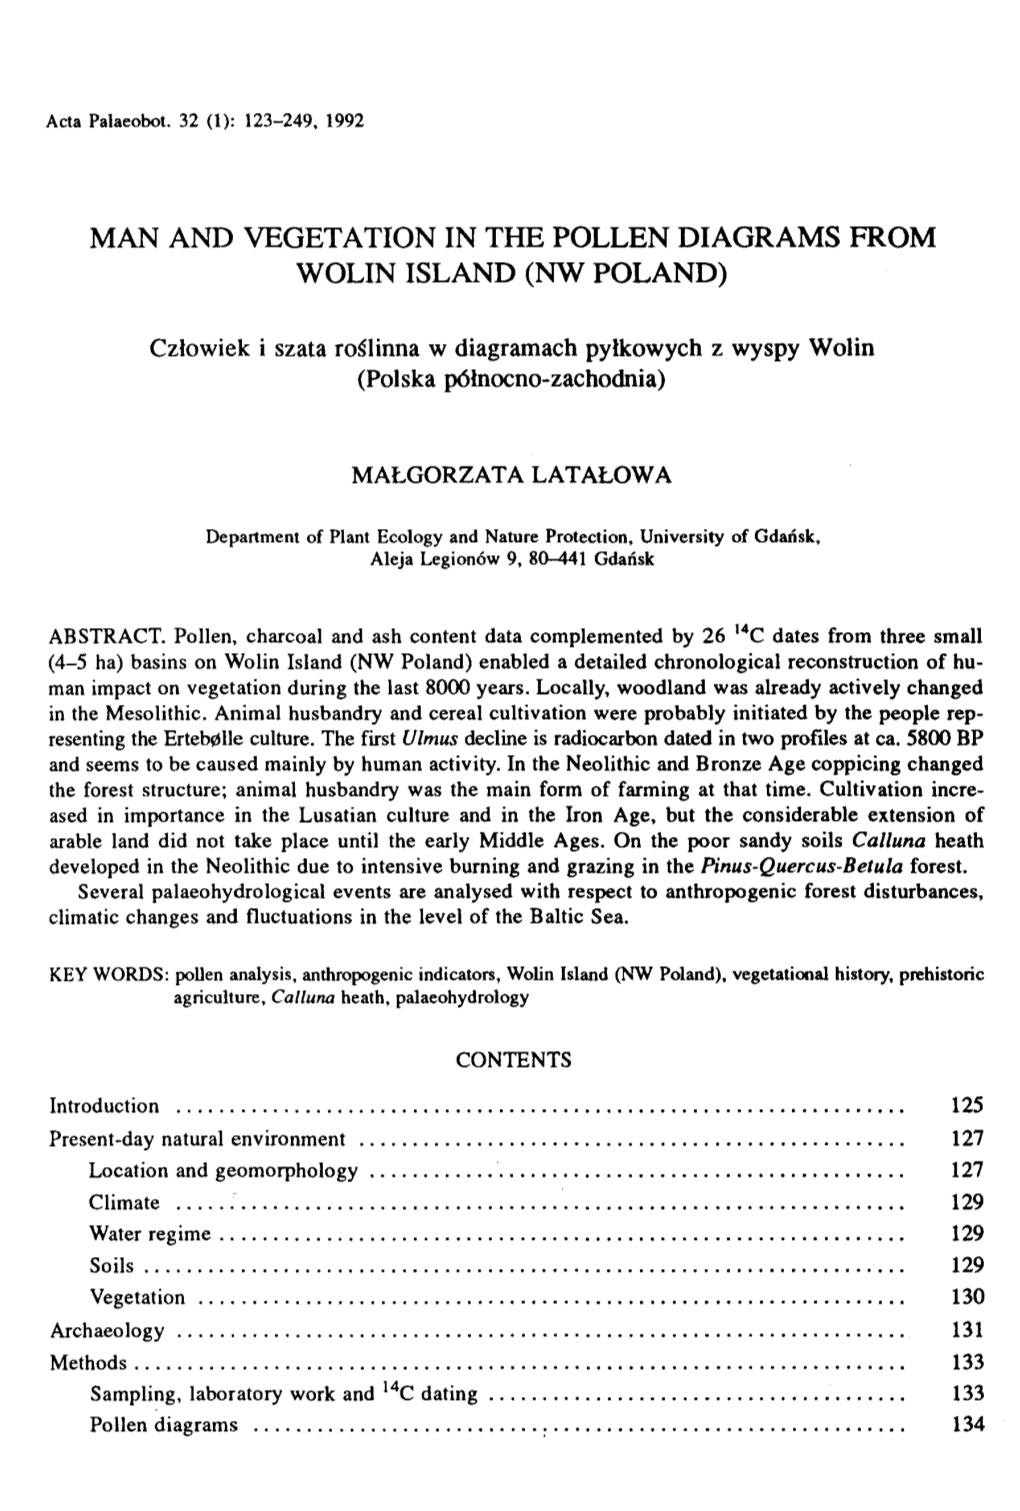 Pollen Diagrams from Wolin Island (Nw Poland)